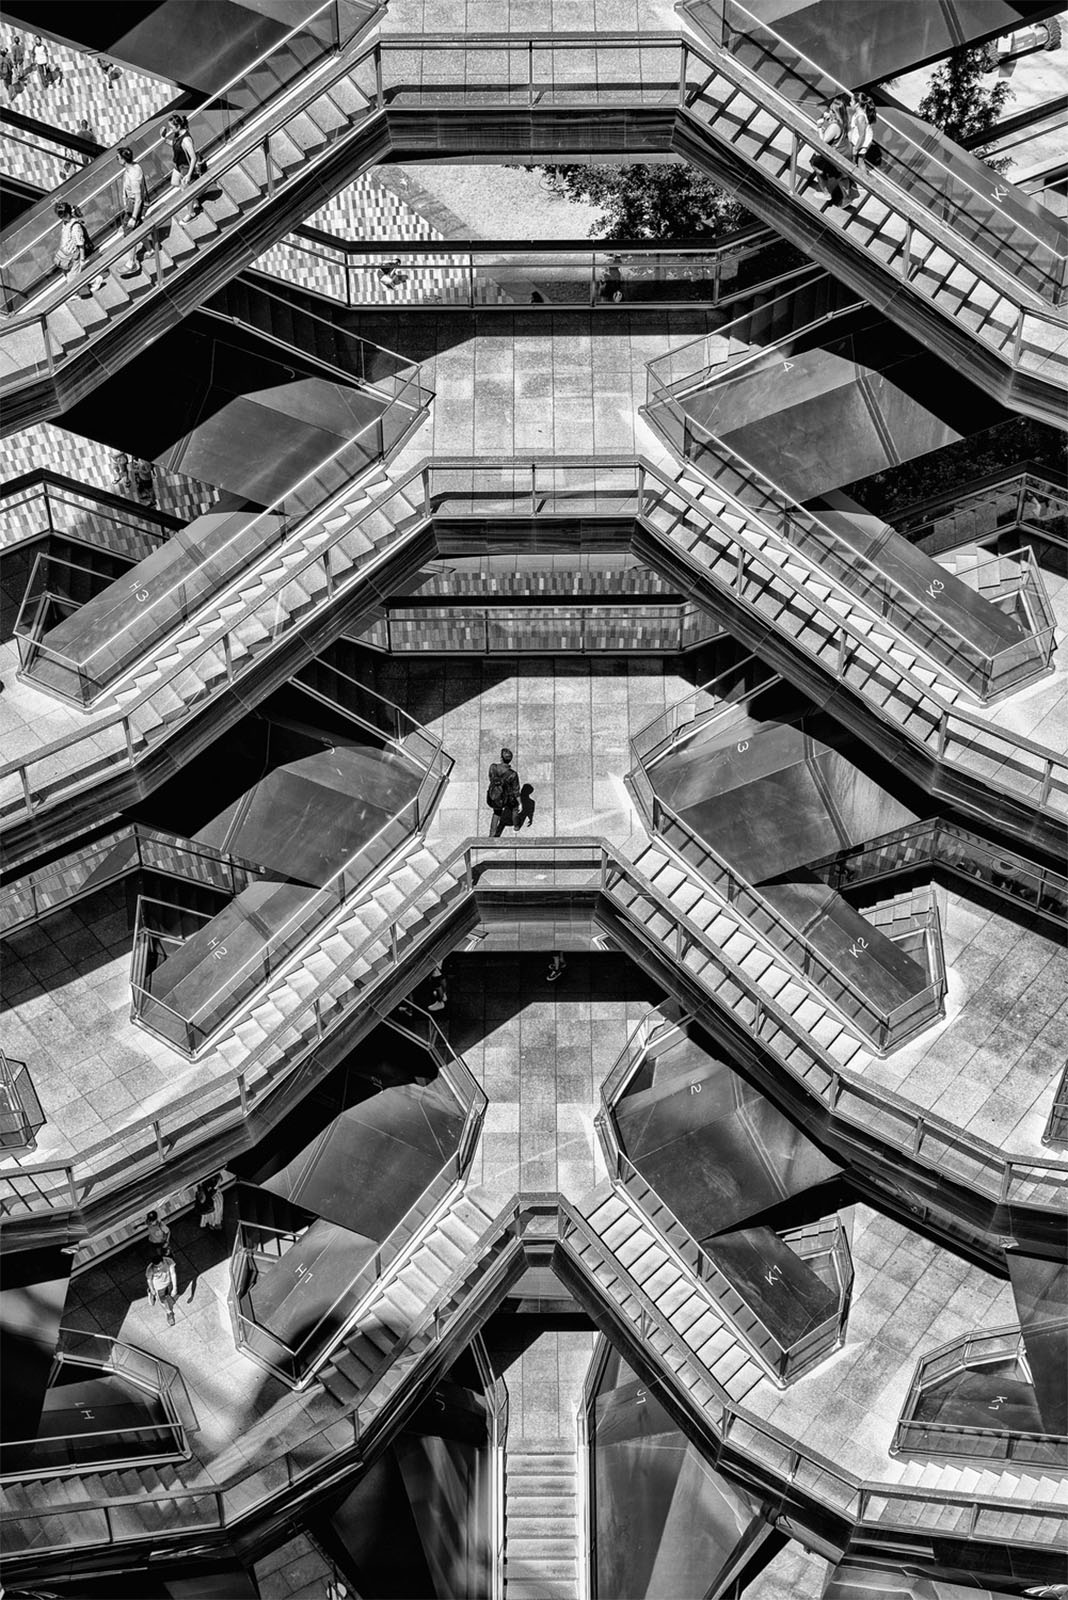 A black and white image of a modern, intricately designed, honeycomb-like structure with multiple levels of walkways and staircases, featuring a few people scattered throughout various levels, emphasizing the geometric pattern and architectural details.